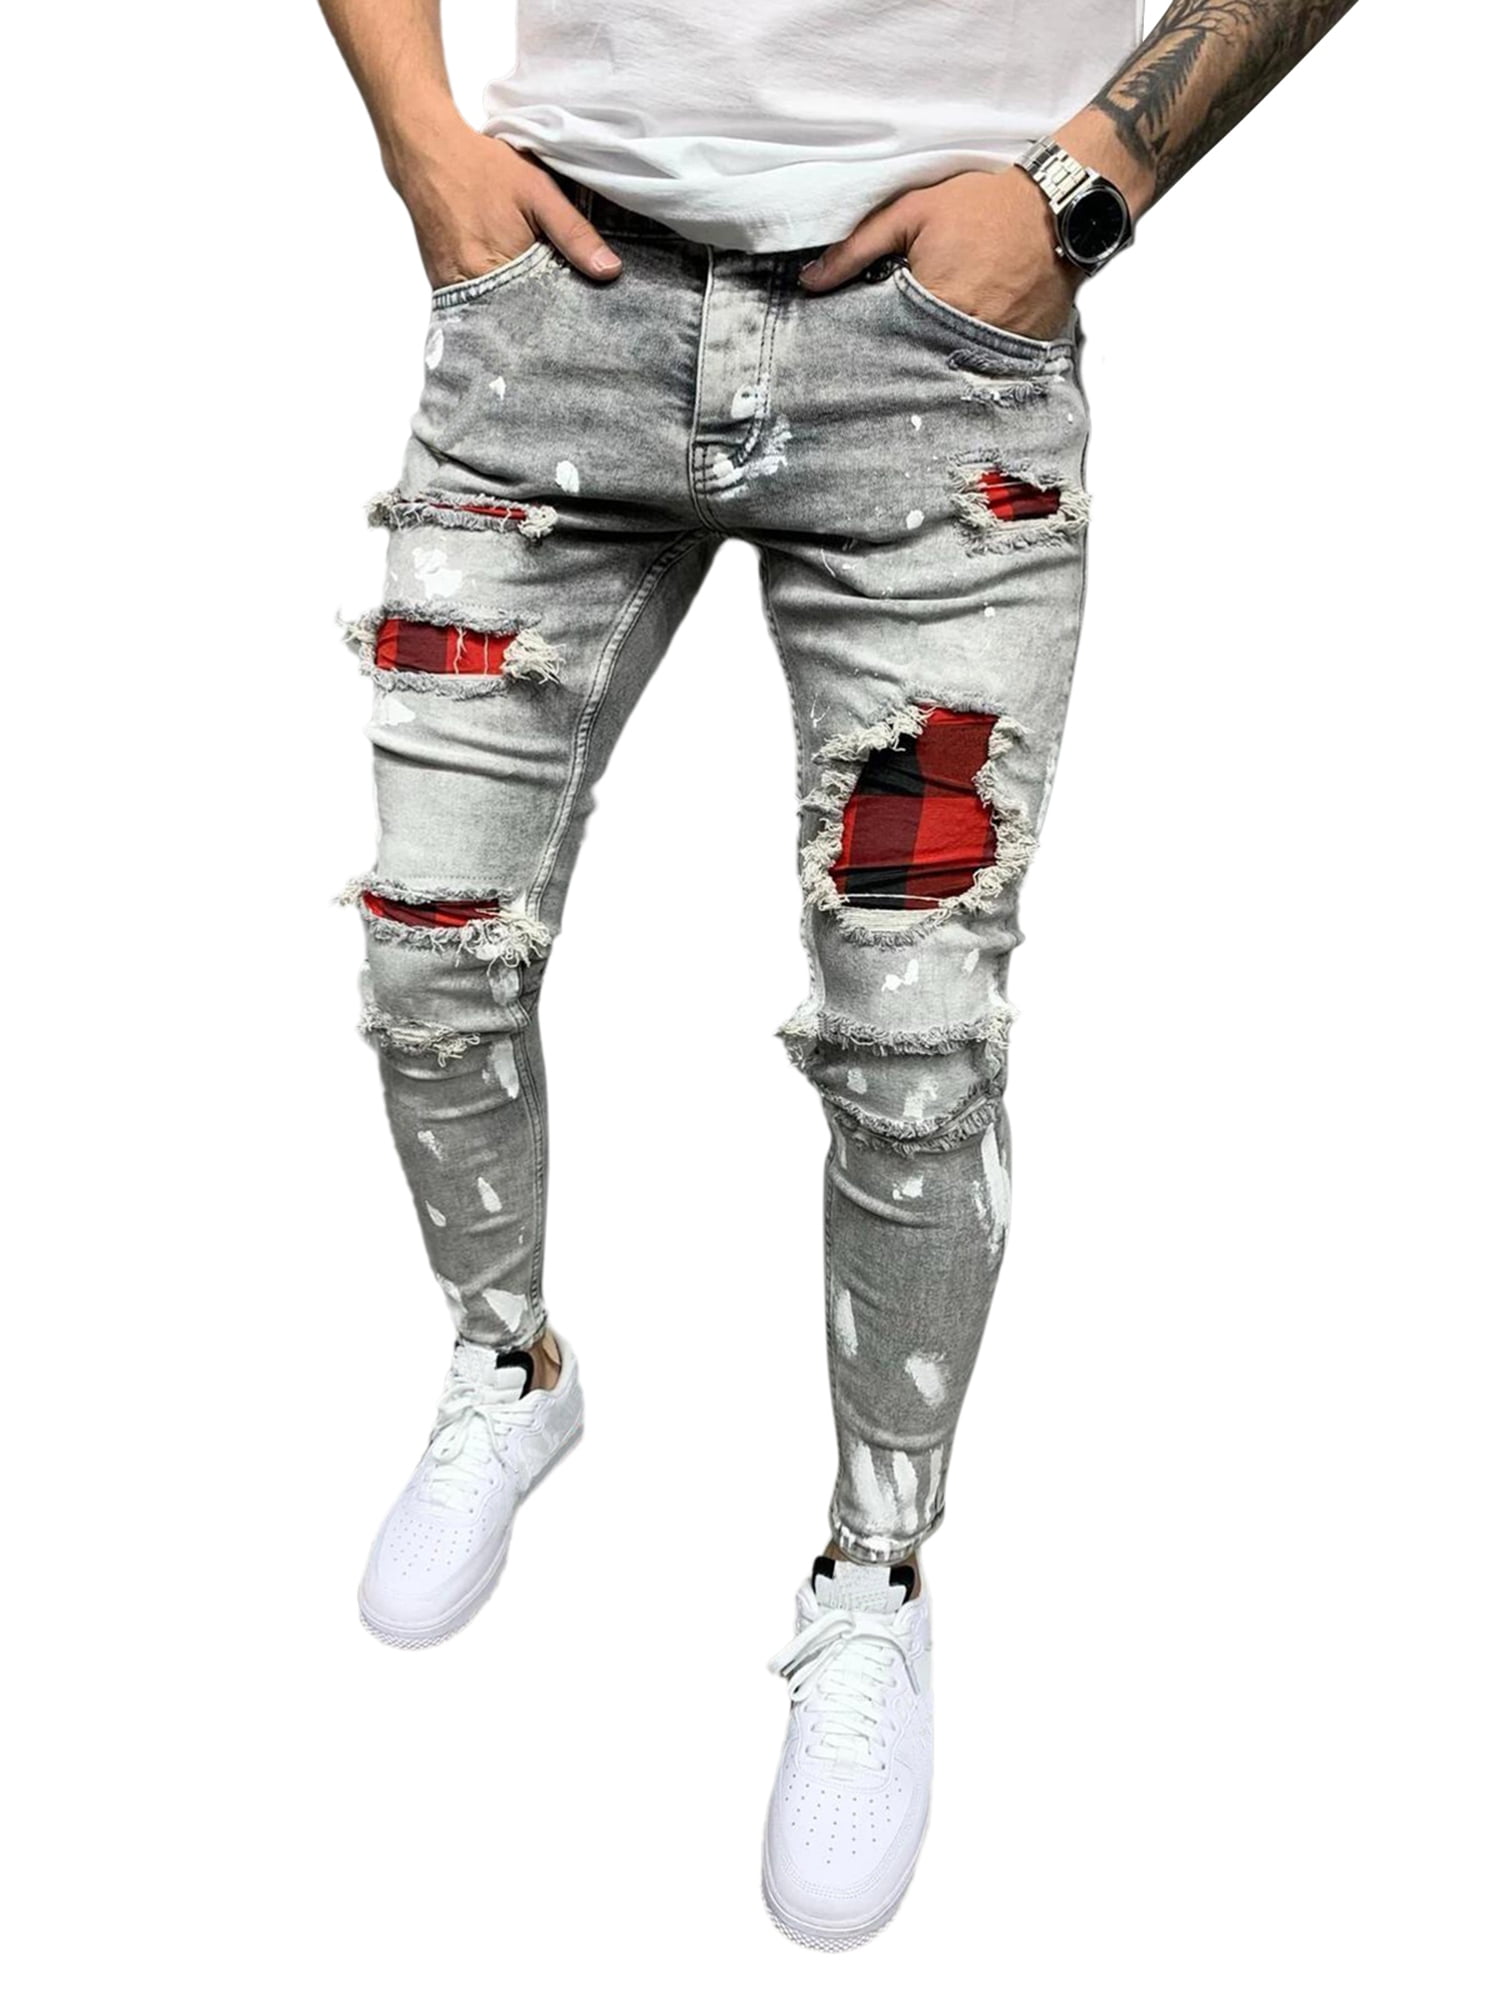 Men Skinny Stretch Denim Ripped Pants Distressed Ripped Freyed Slim Fit  Jeans Destroyed Ripped Jeans Black White Red Jeans | Wish